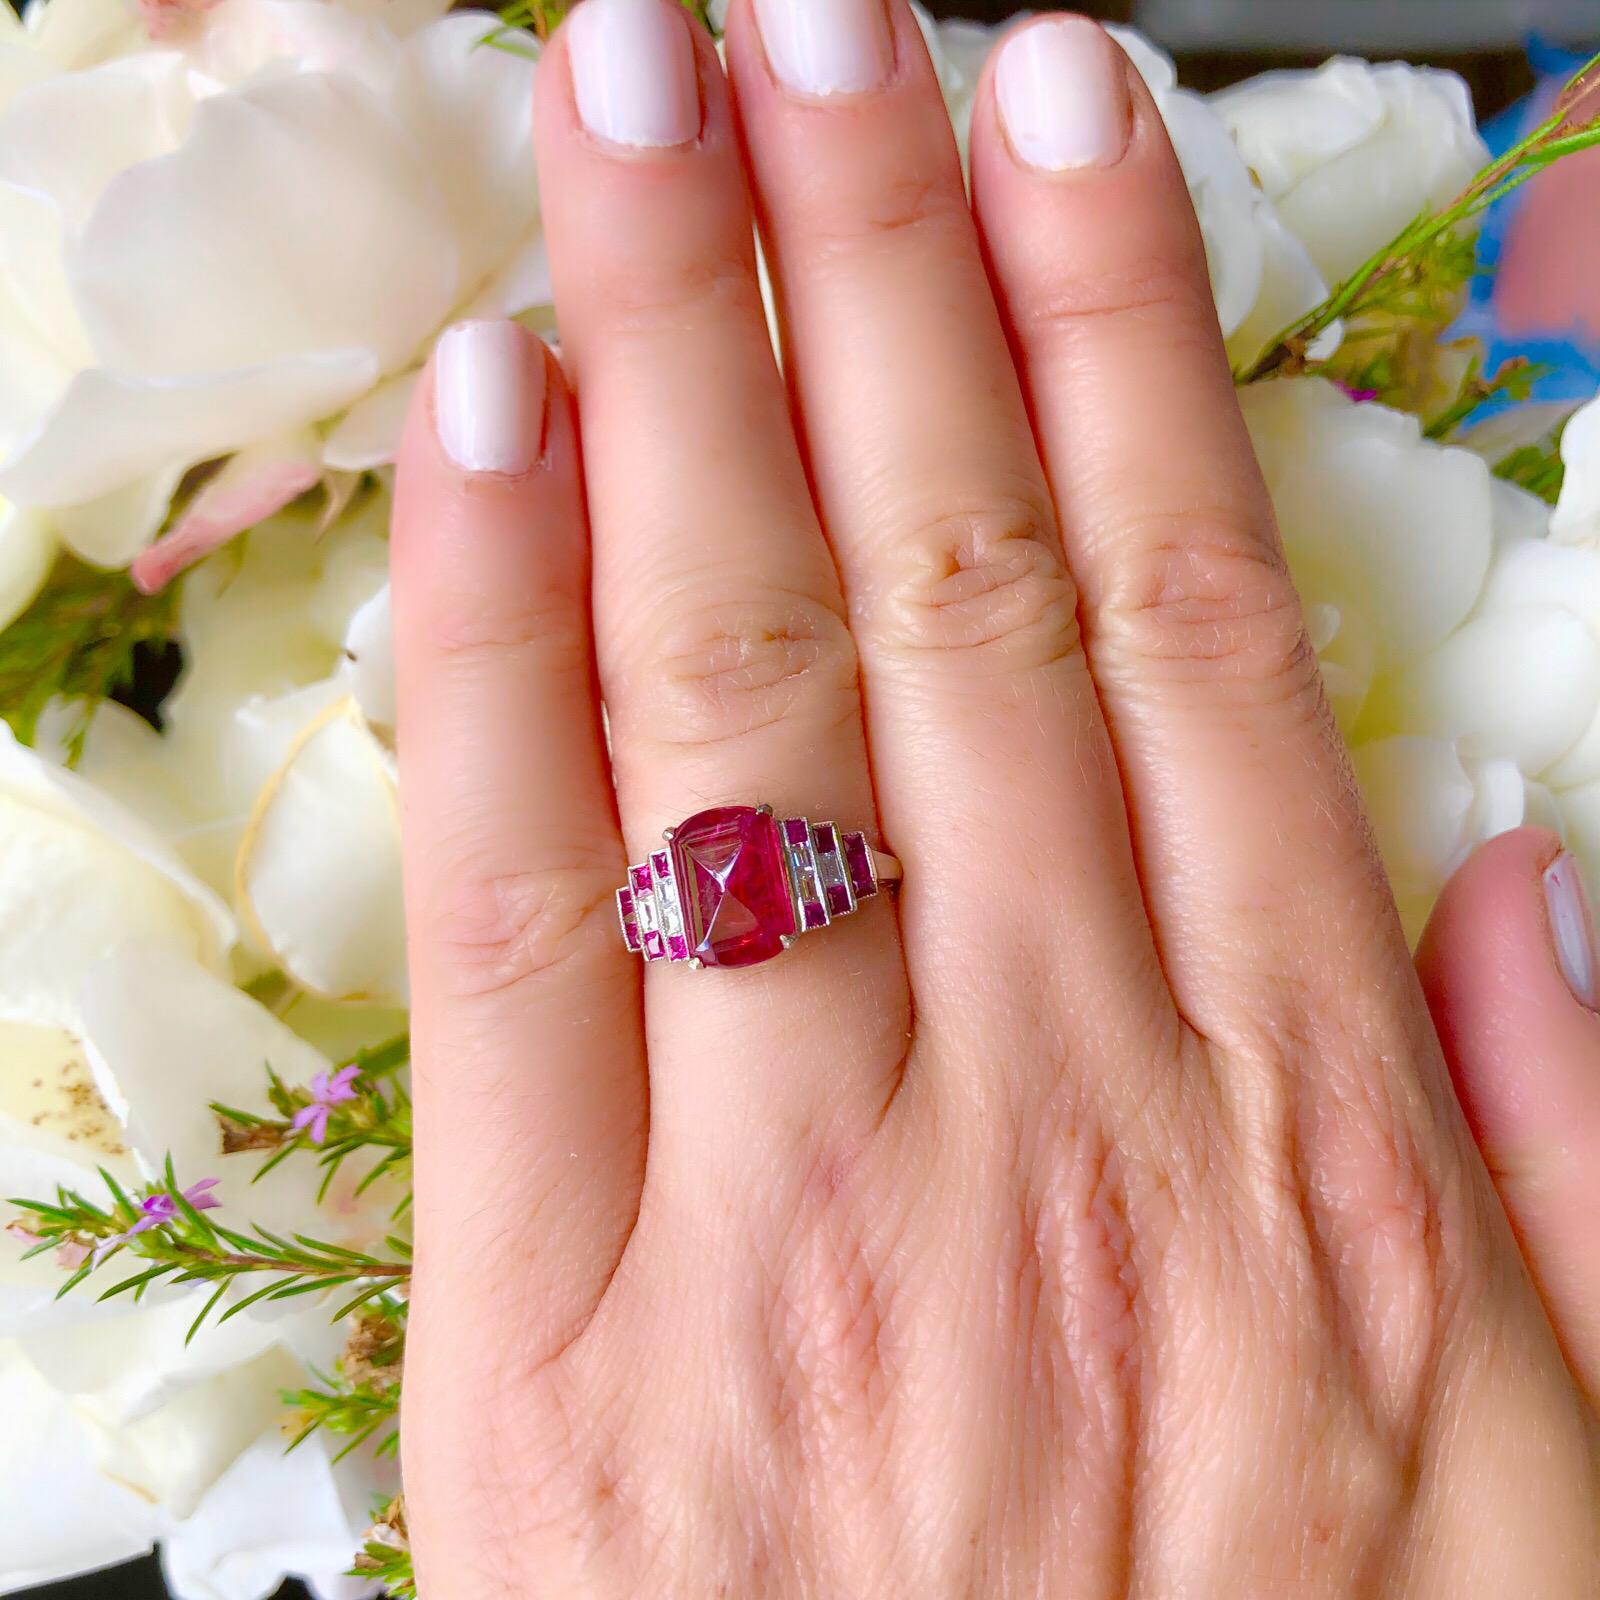 18k white gold Deco style ring featuring a 2.88 carat Burmese fancy reddish pink sapphire with steps of calibre cut rubies and baguette diamonds highlighting the main stone. The ring measures 10.5mm to 1.5mm wide and is currently a size 7.0 with